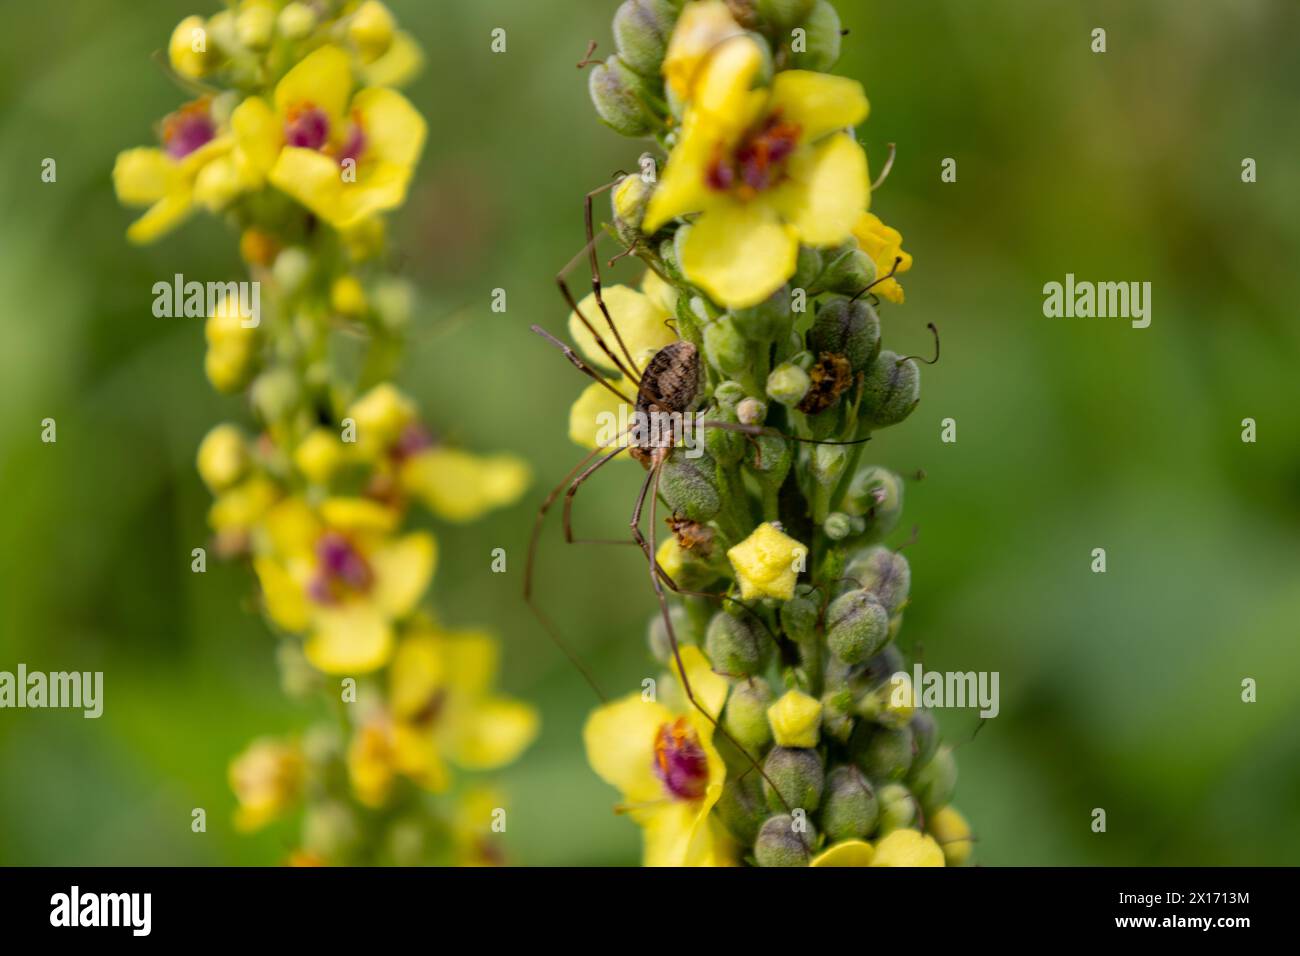 Spider on a flower of a yellow mullein (Verbena vulgaris) Stock Photo